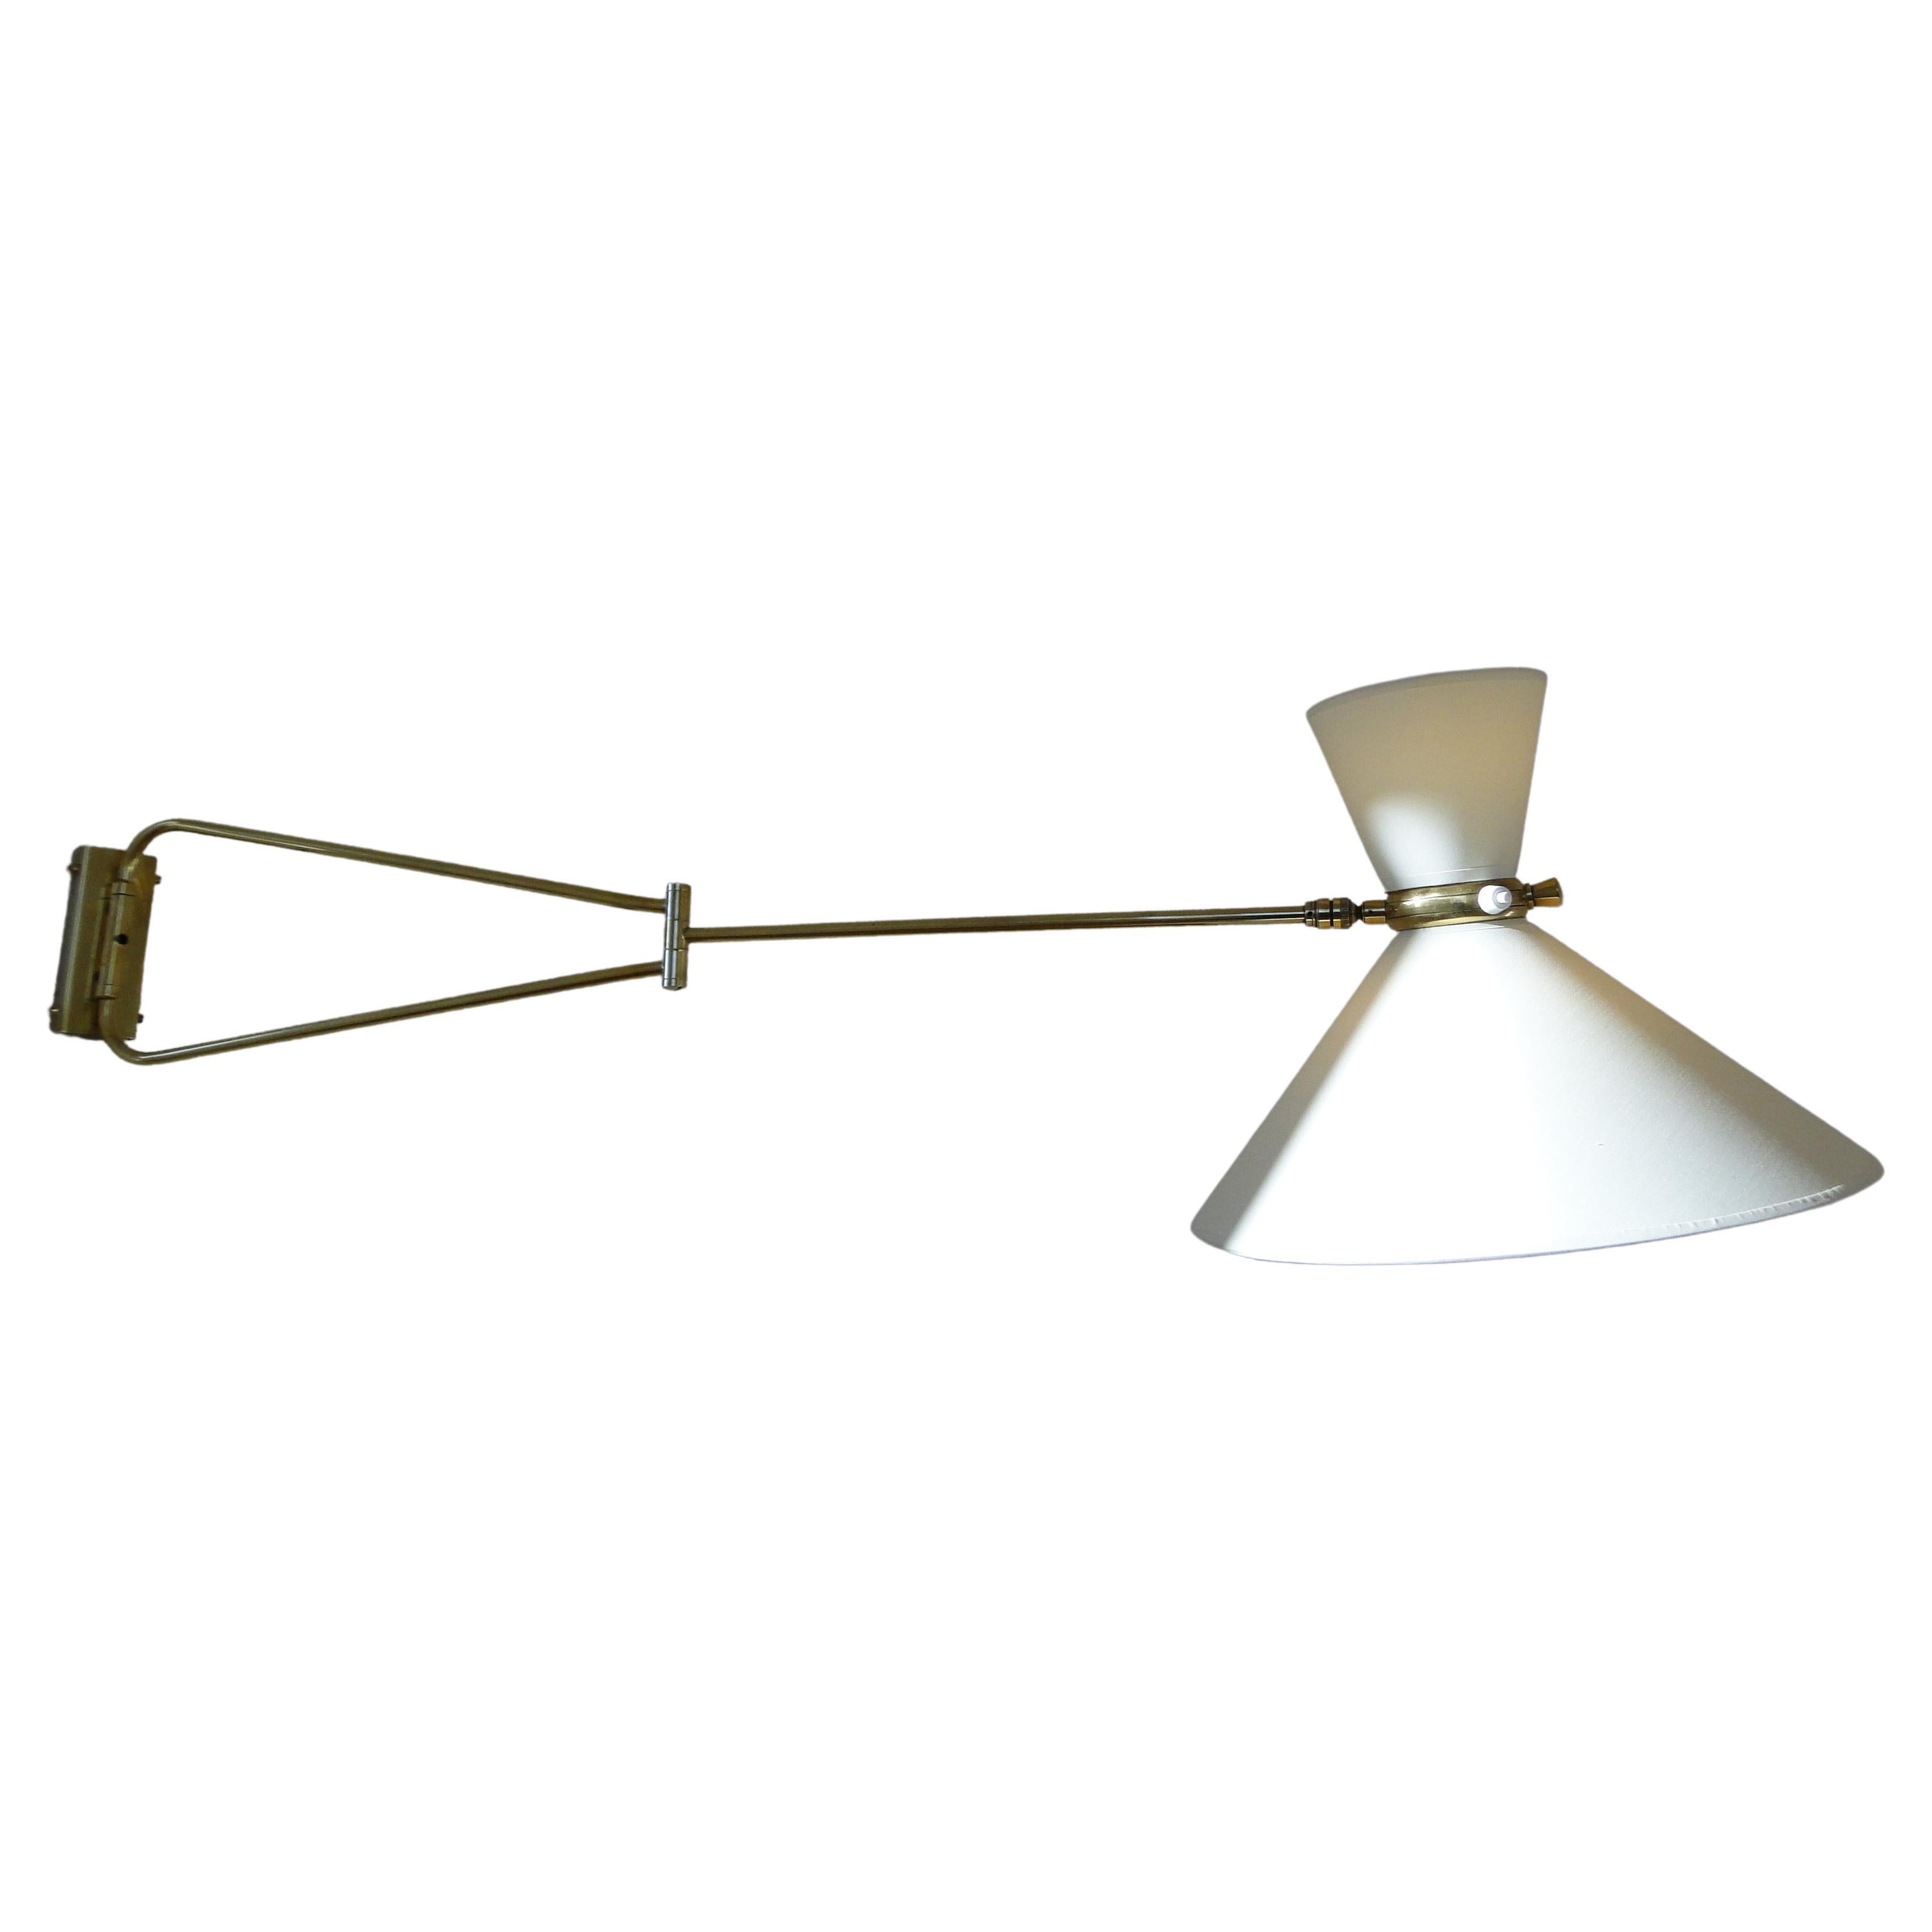 Vintage very large wall lamp by René Mathieu 1950 France.

Wall light by René Mathieu from the 1950s.

2-Arm articulated  brass stem.

The double bulb sconce has independent switches for the up and down lights. 

New diabolo lampshade.

36 cm in and